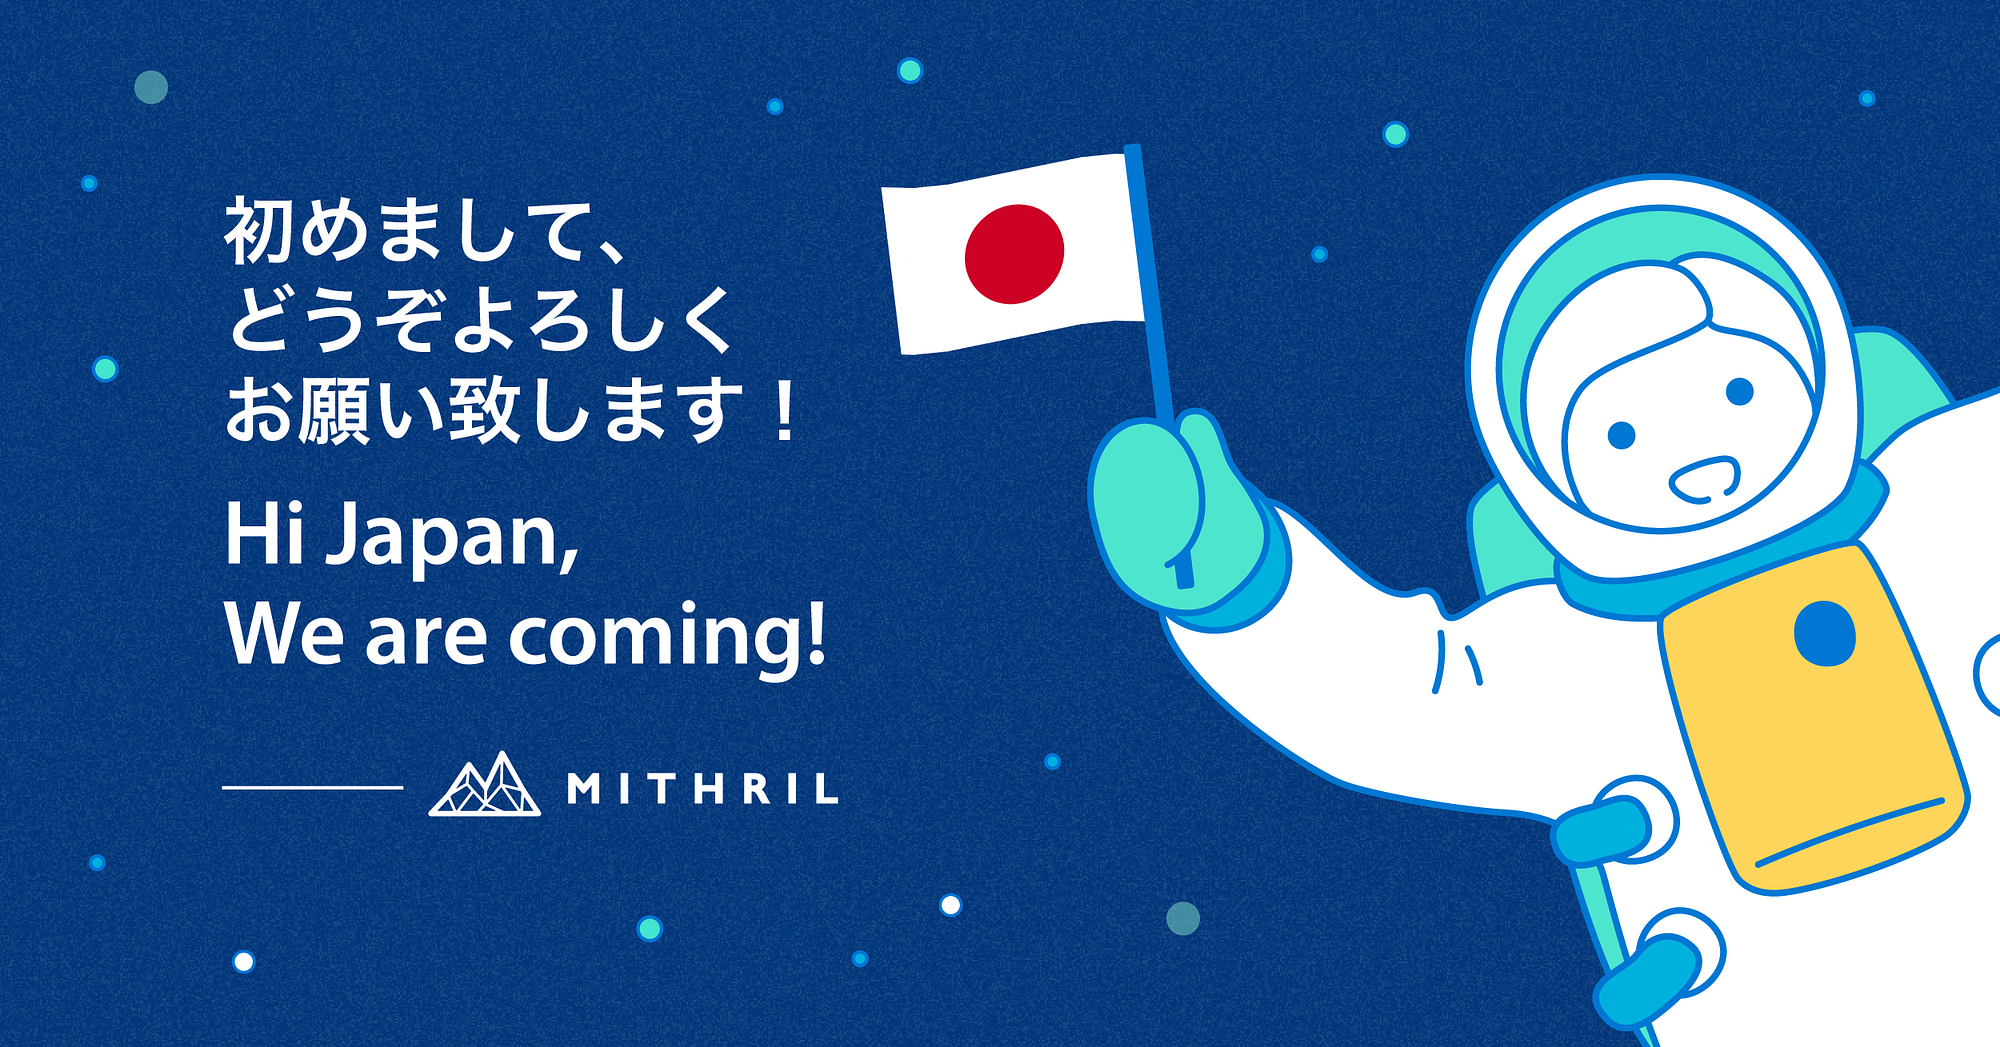 News-Global positioning starts from Asia, Mithril is Going to Japan!｜佈局全球站穩亞洲 秘銀即將進軍日本市場